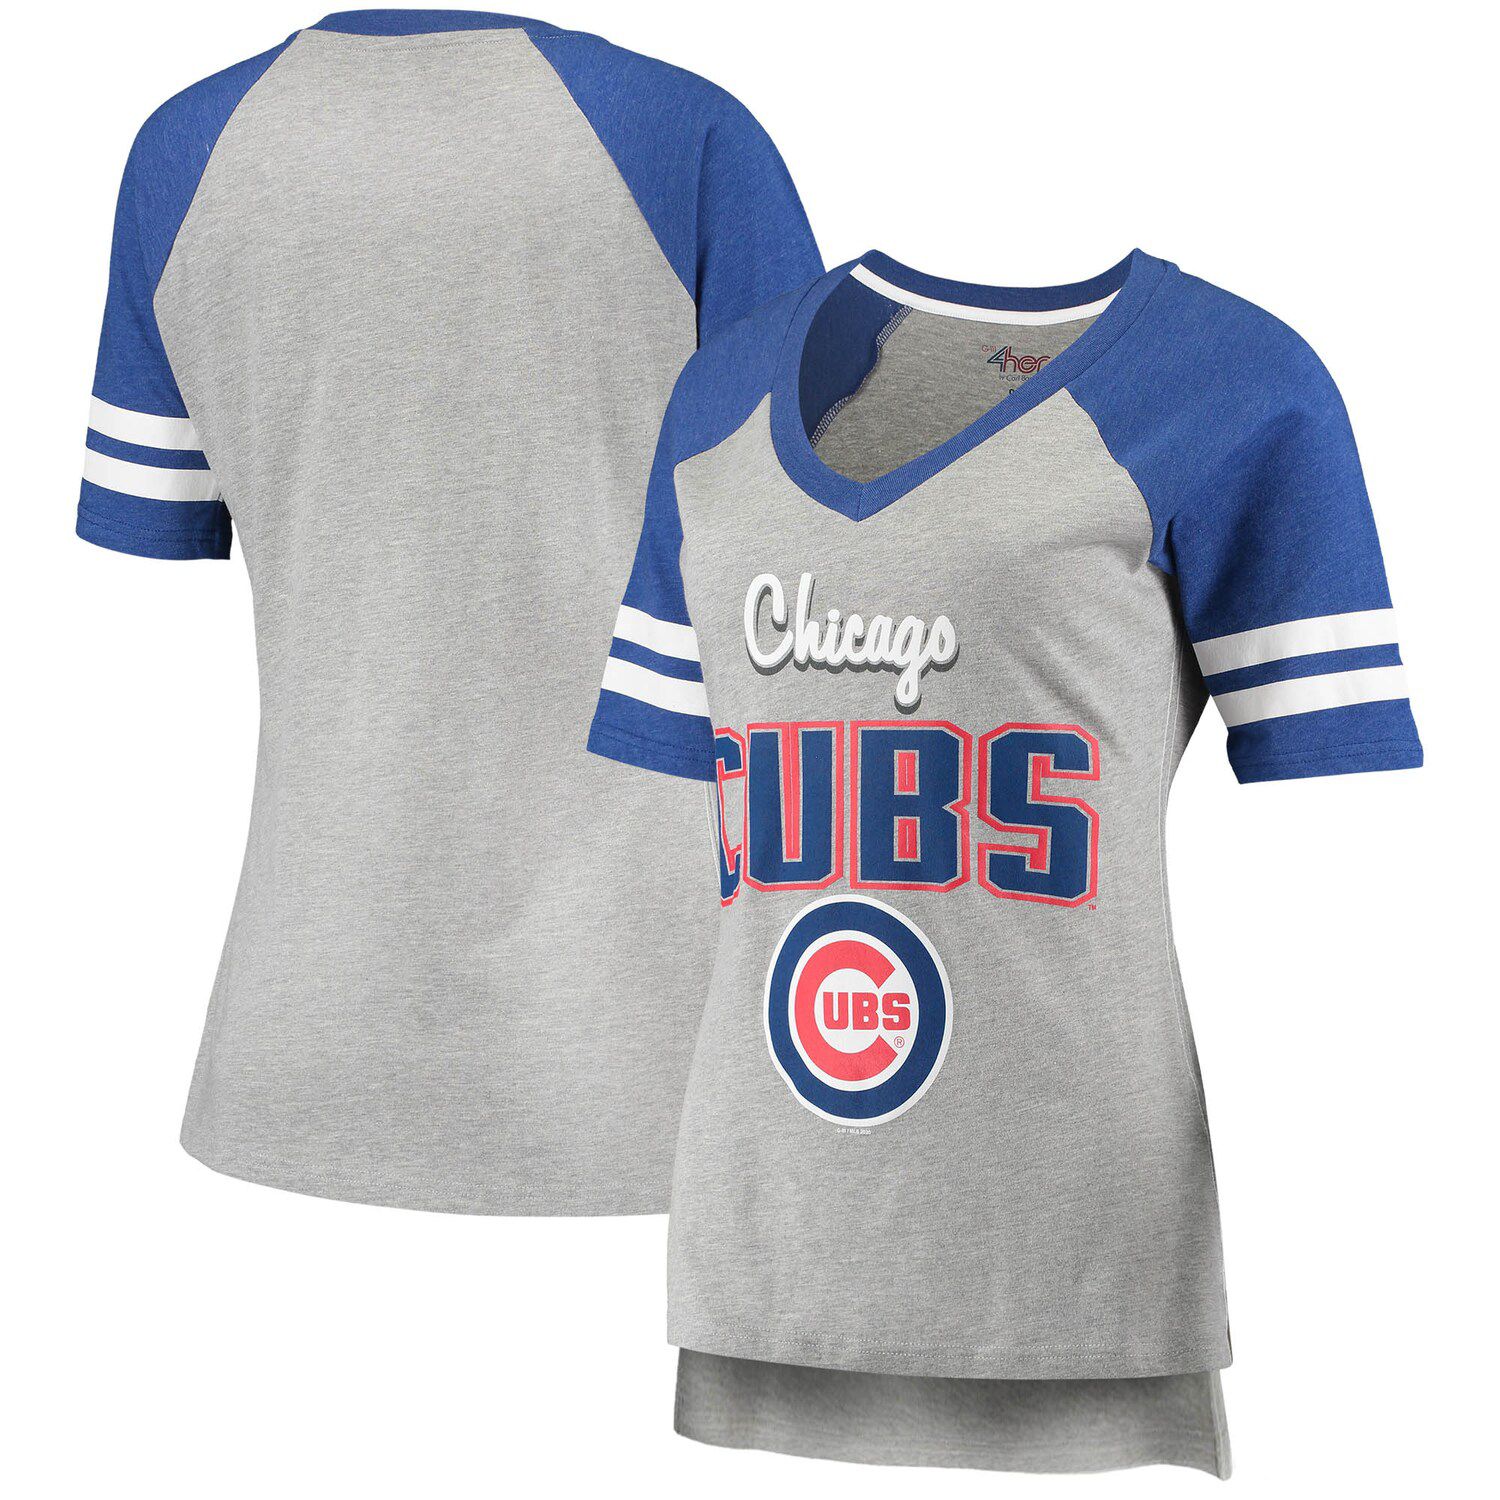 Fanatics Women's Branded Royal, Red Chicago Cubs Iconic Raglan